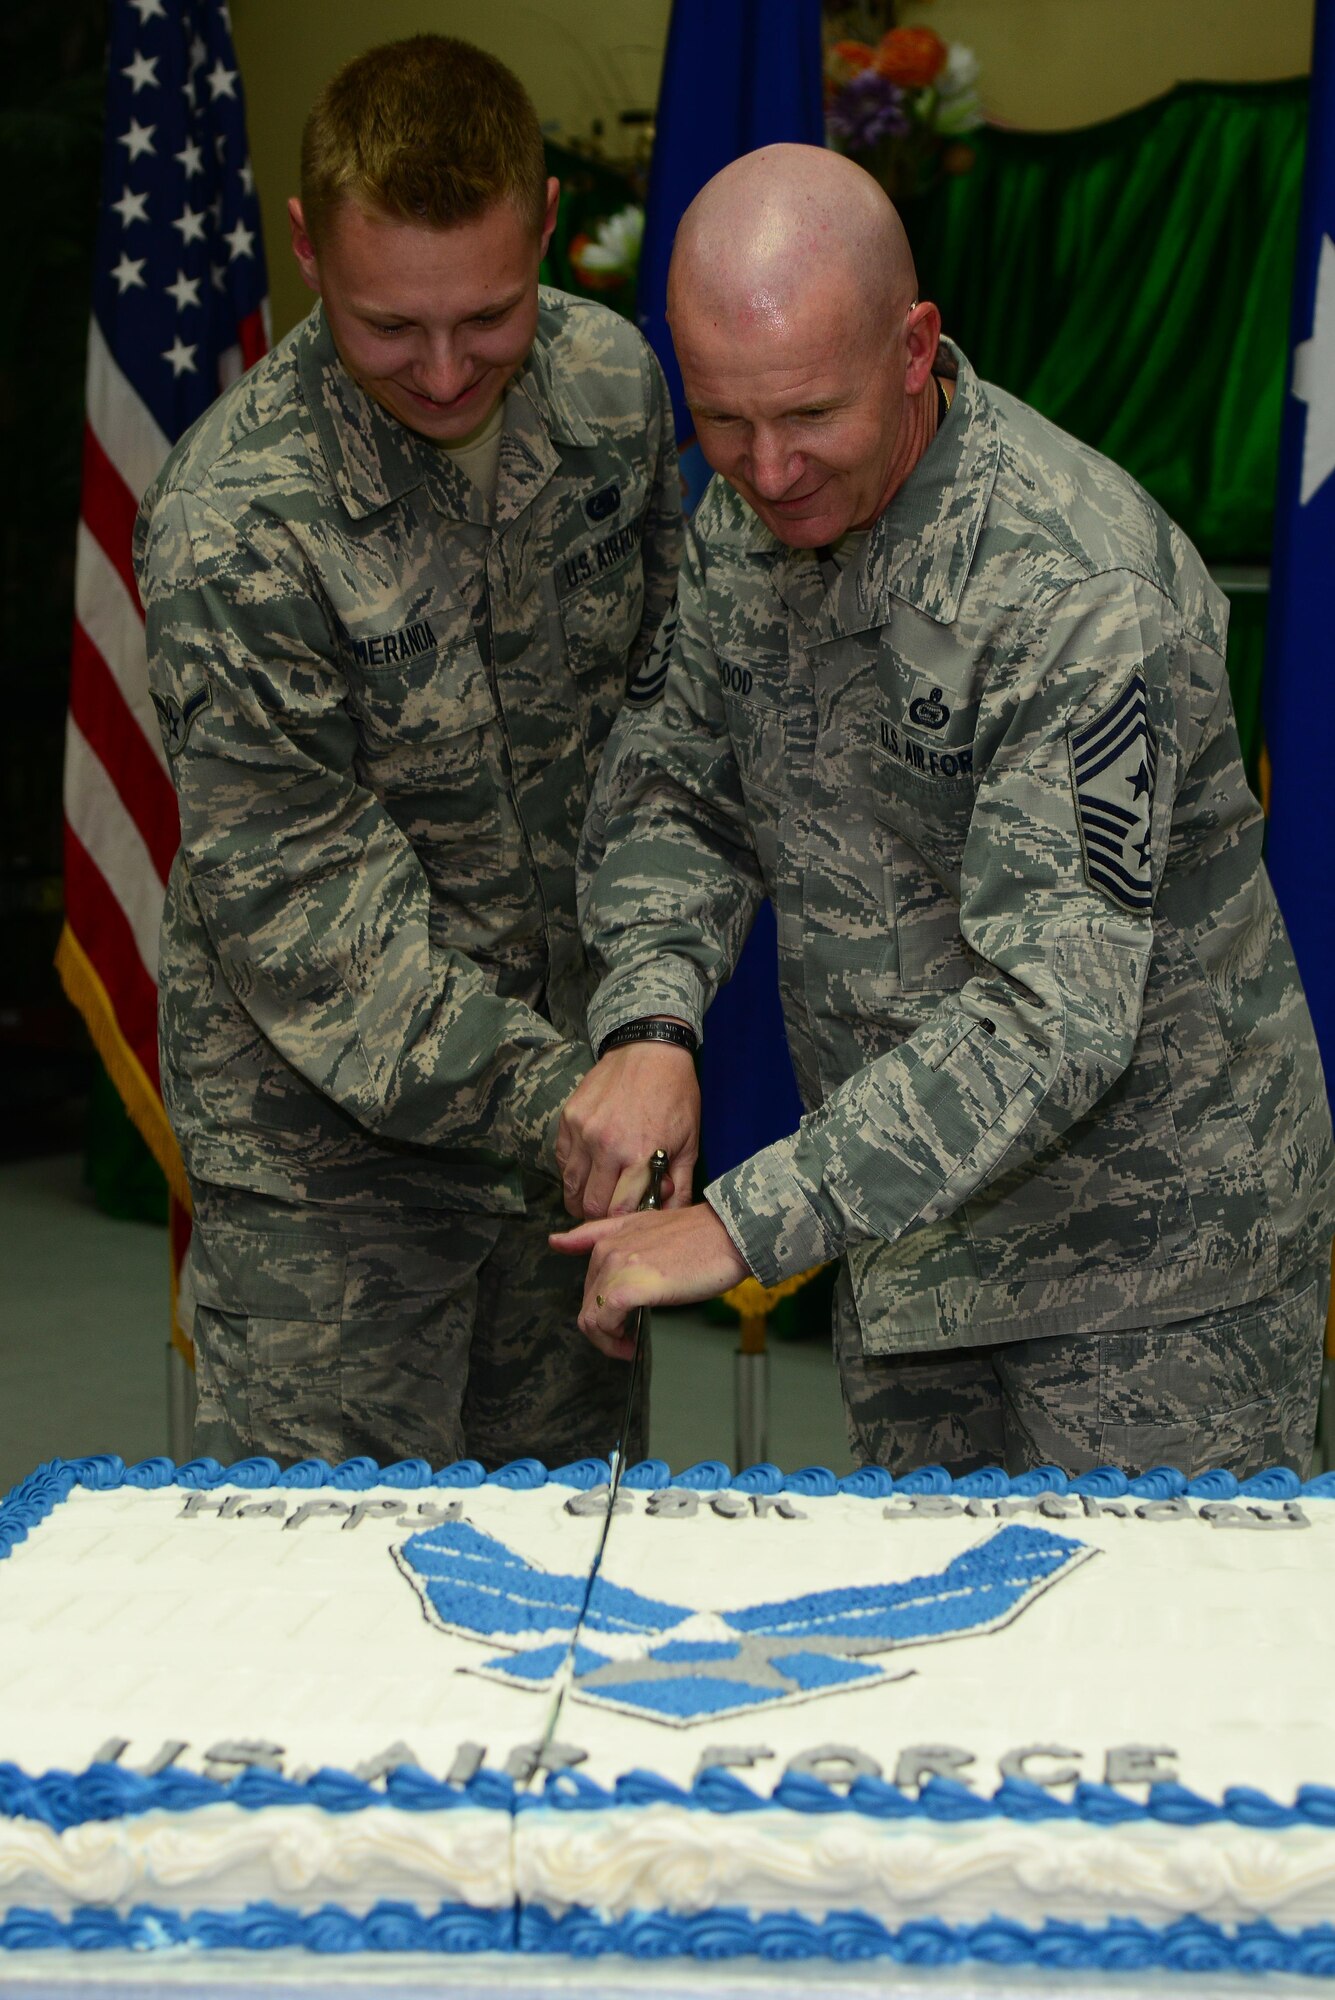 Airman Caden Meranda, 379th Expeditionary Logisitics Squadron fuels distribution officer, and Chief Master Sgt. Thomas Good, 379th Air Expeditionary Wing command chief, cut the ceremonial cake at the Independence Dining Facility, during the cake cutting ceremony Sept. 18, 2015, at Al Udeid Air Base, Qatar. The cake cutting ceremony is traditionally performed by the oldest and youngest Airman. This year marks 68 years of military superiority through air power. (U.S. Air Force photo by Tech. Sgt. Rasheen Douglas)